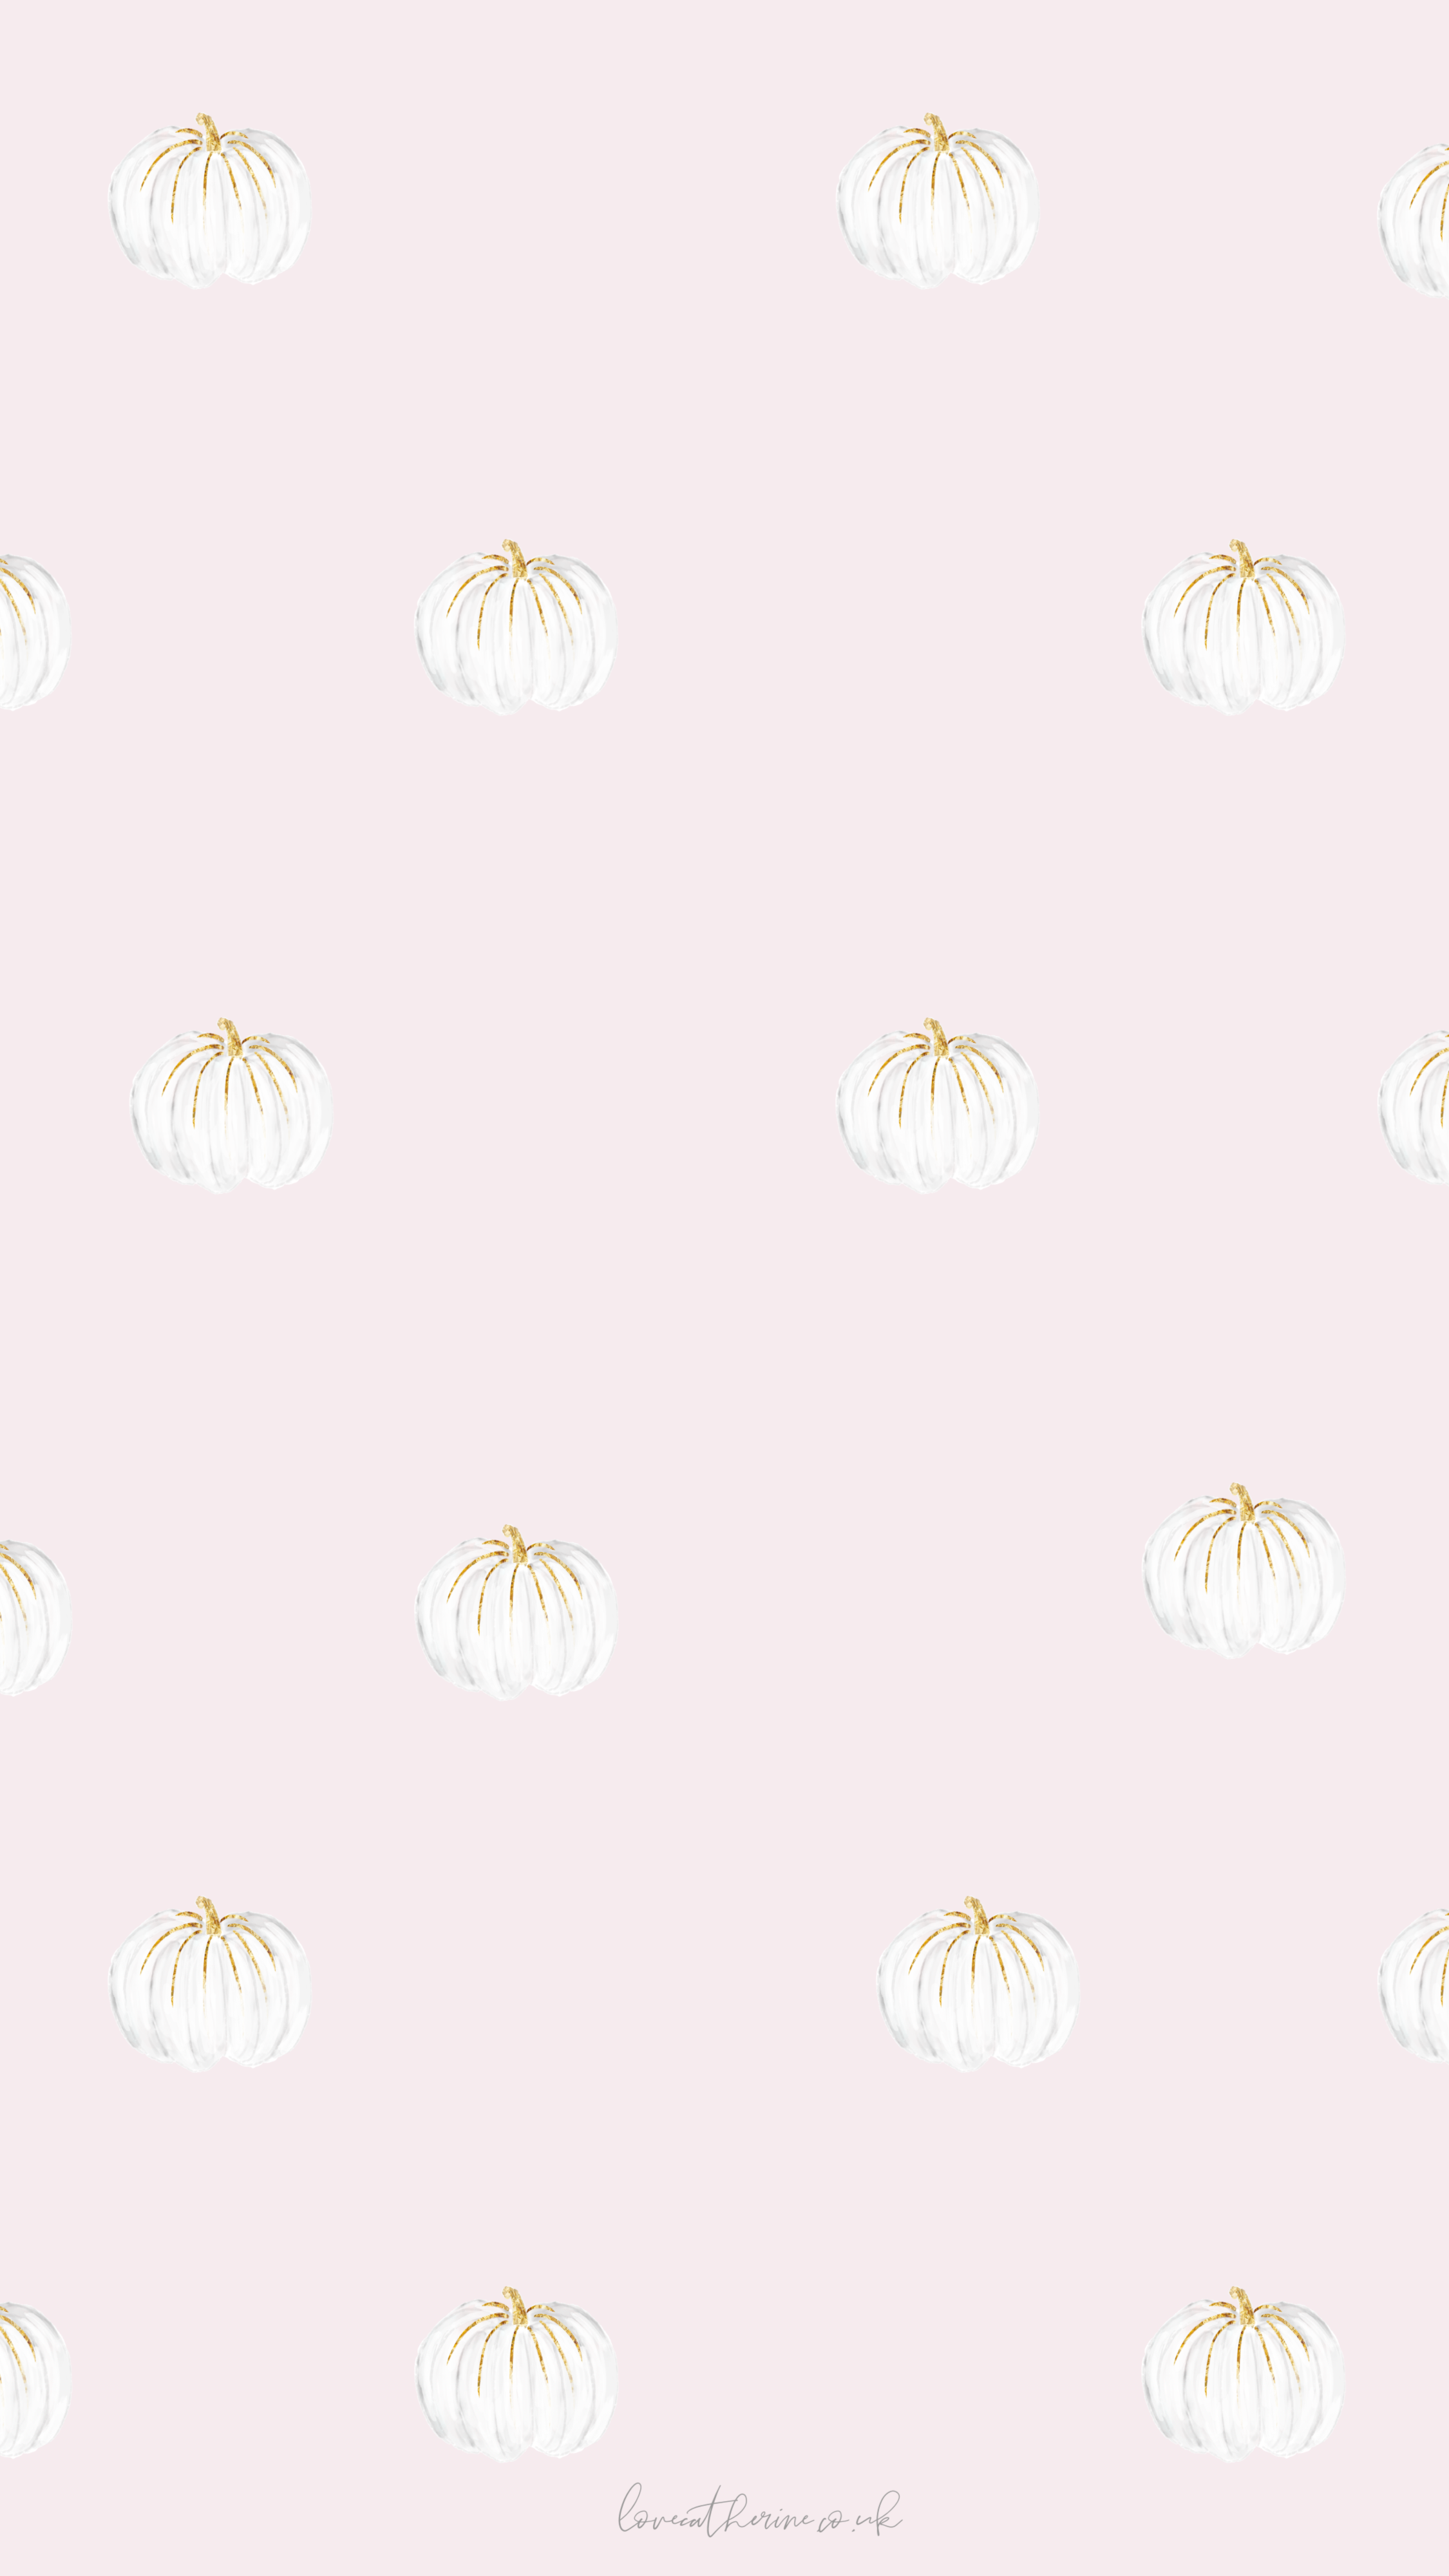 Free Enchanting iPhone Wallpaper For Autumn